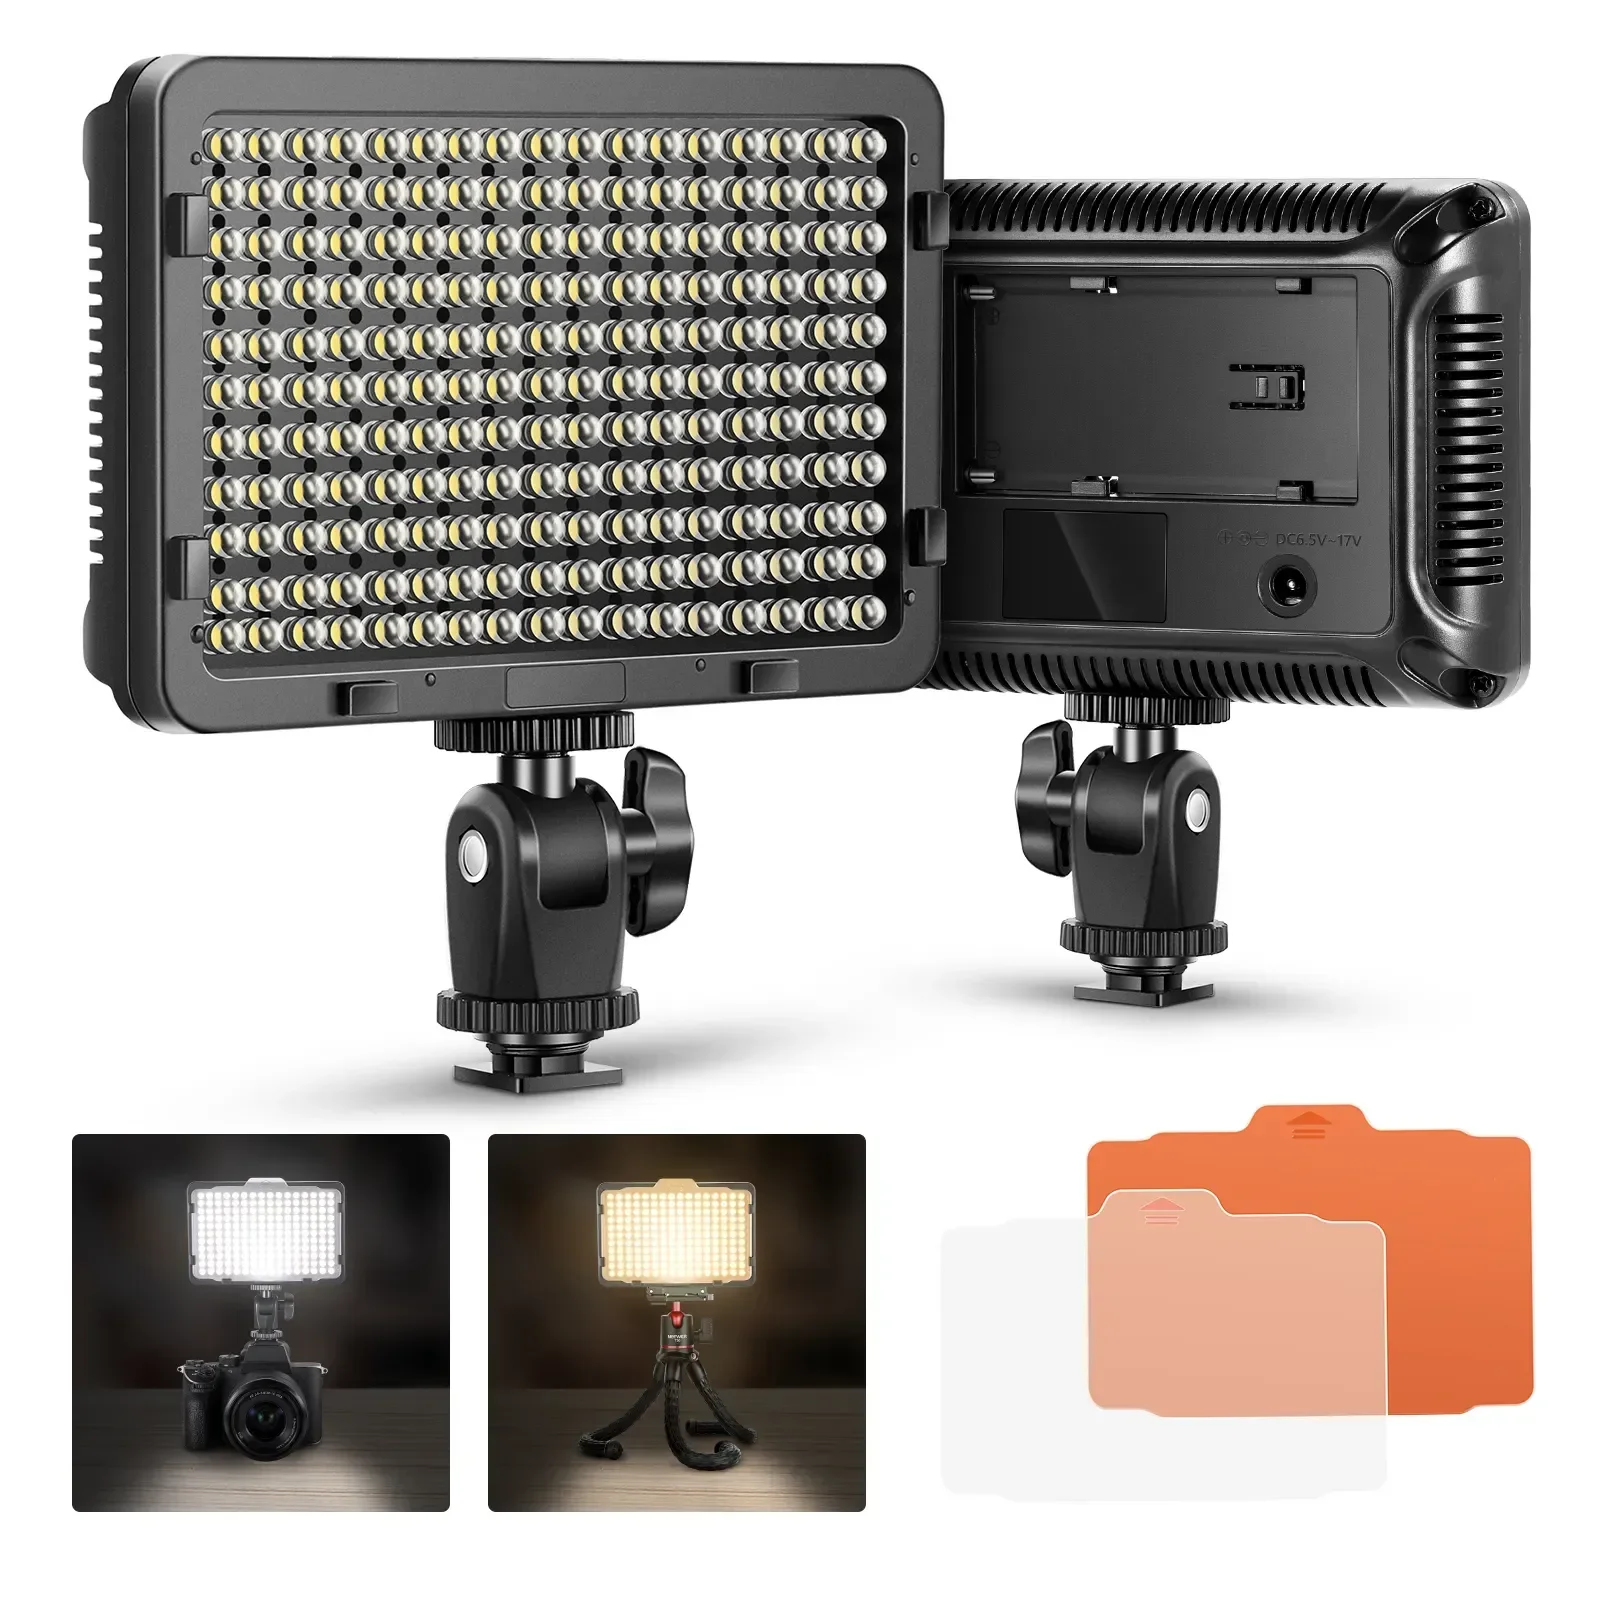 

Neewer On Camera Video Light Photo Dimmable 176 LED Panel With 1/4" Thread For Canon, Nikon, Sony And Other DSLR Cameras,